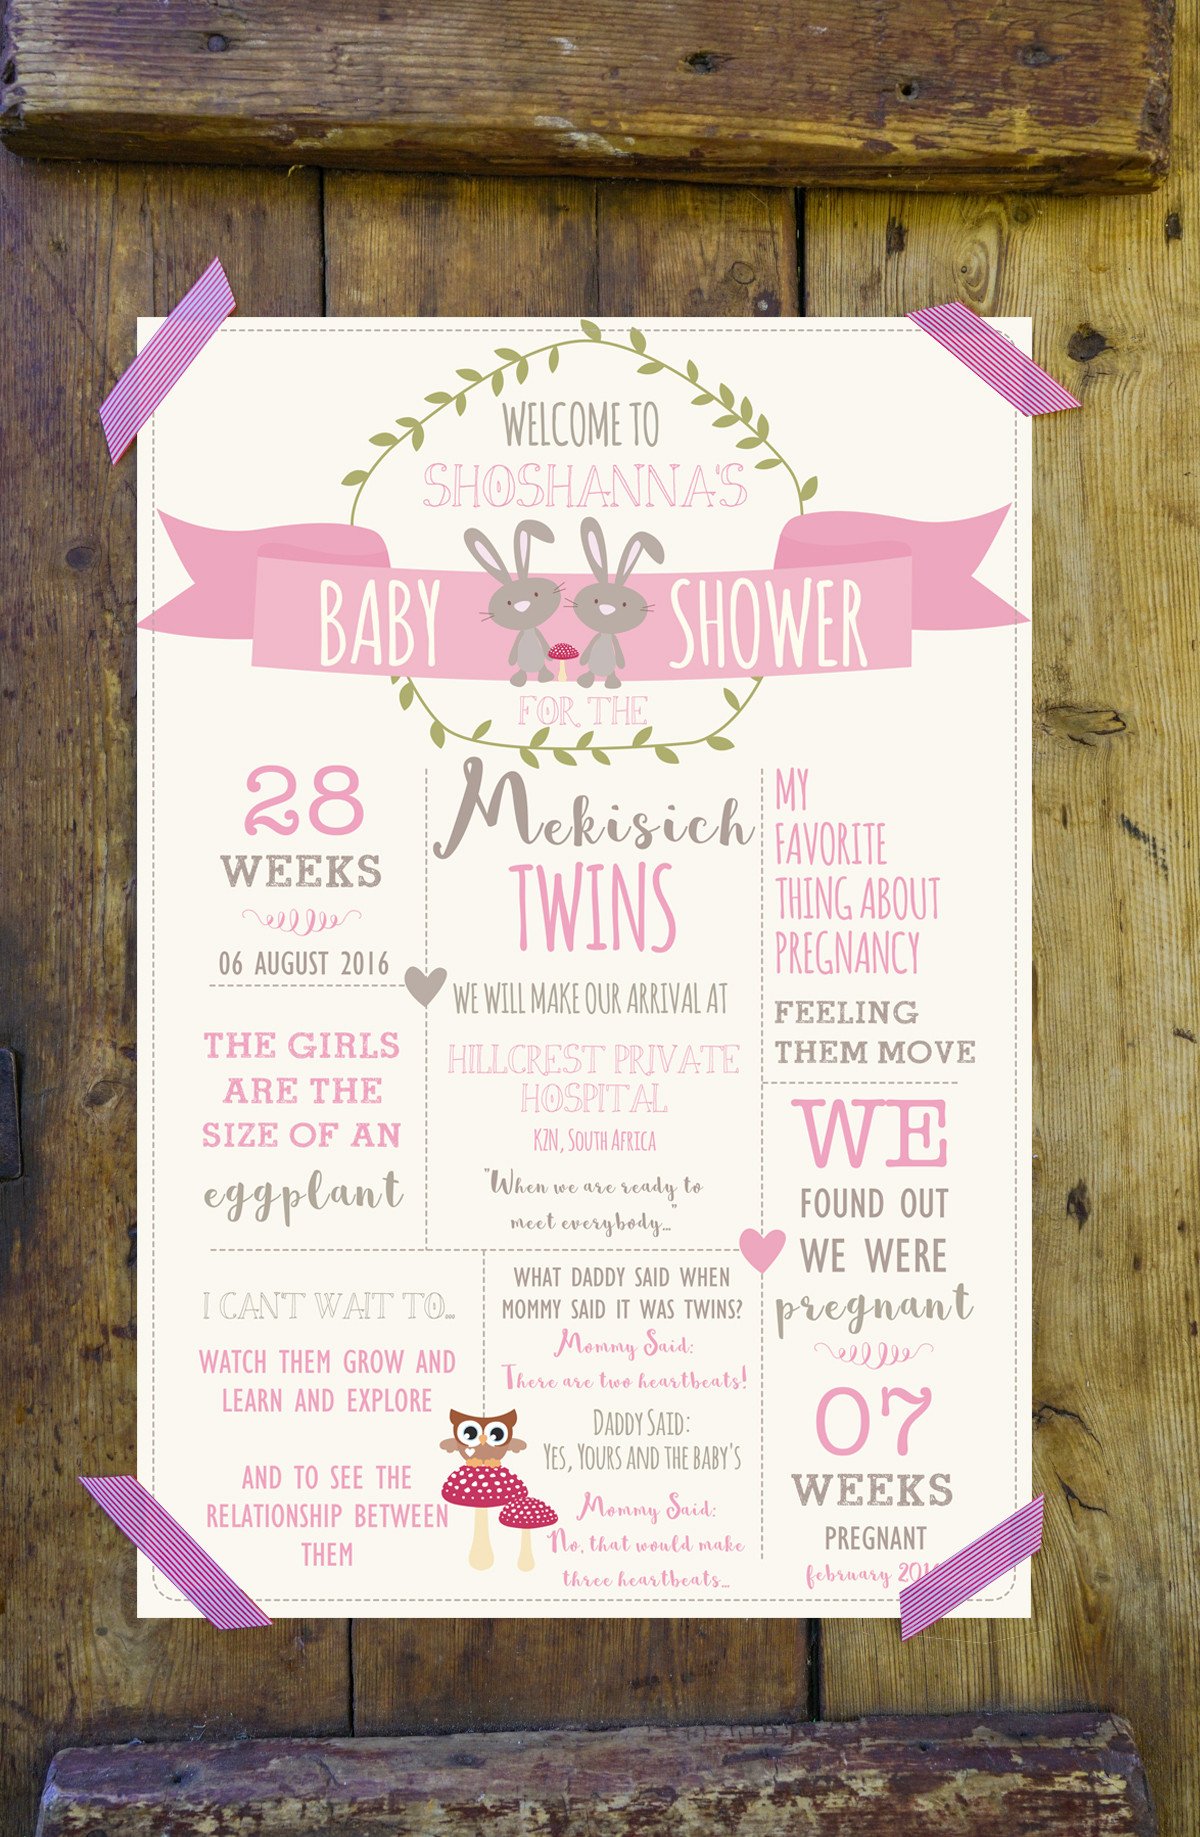 Gorgeous Baby Shower Ideas for twin girls baby shower, in stylish pink and gray